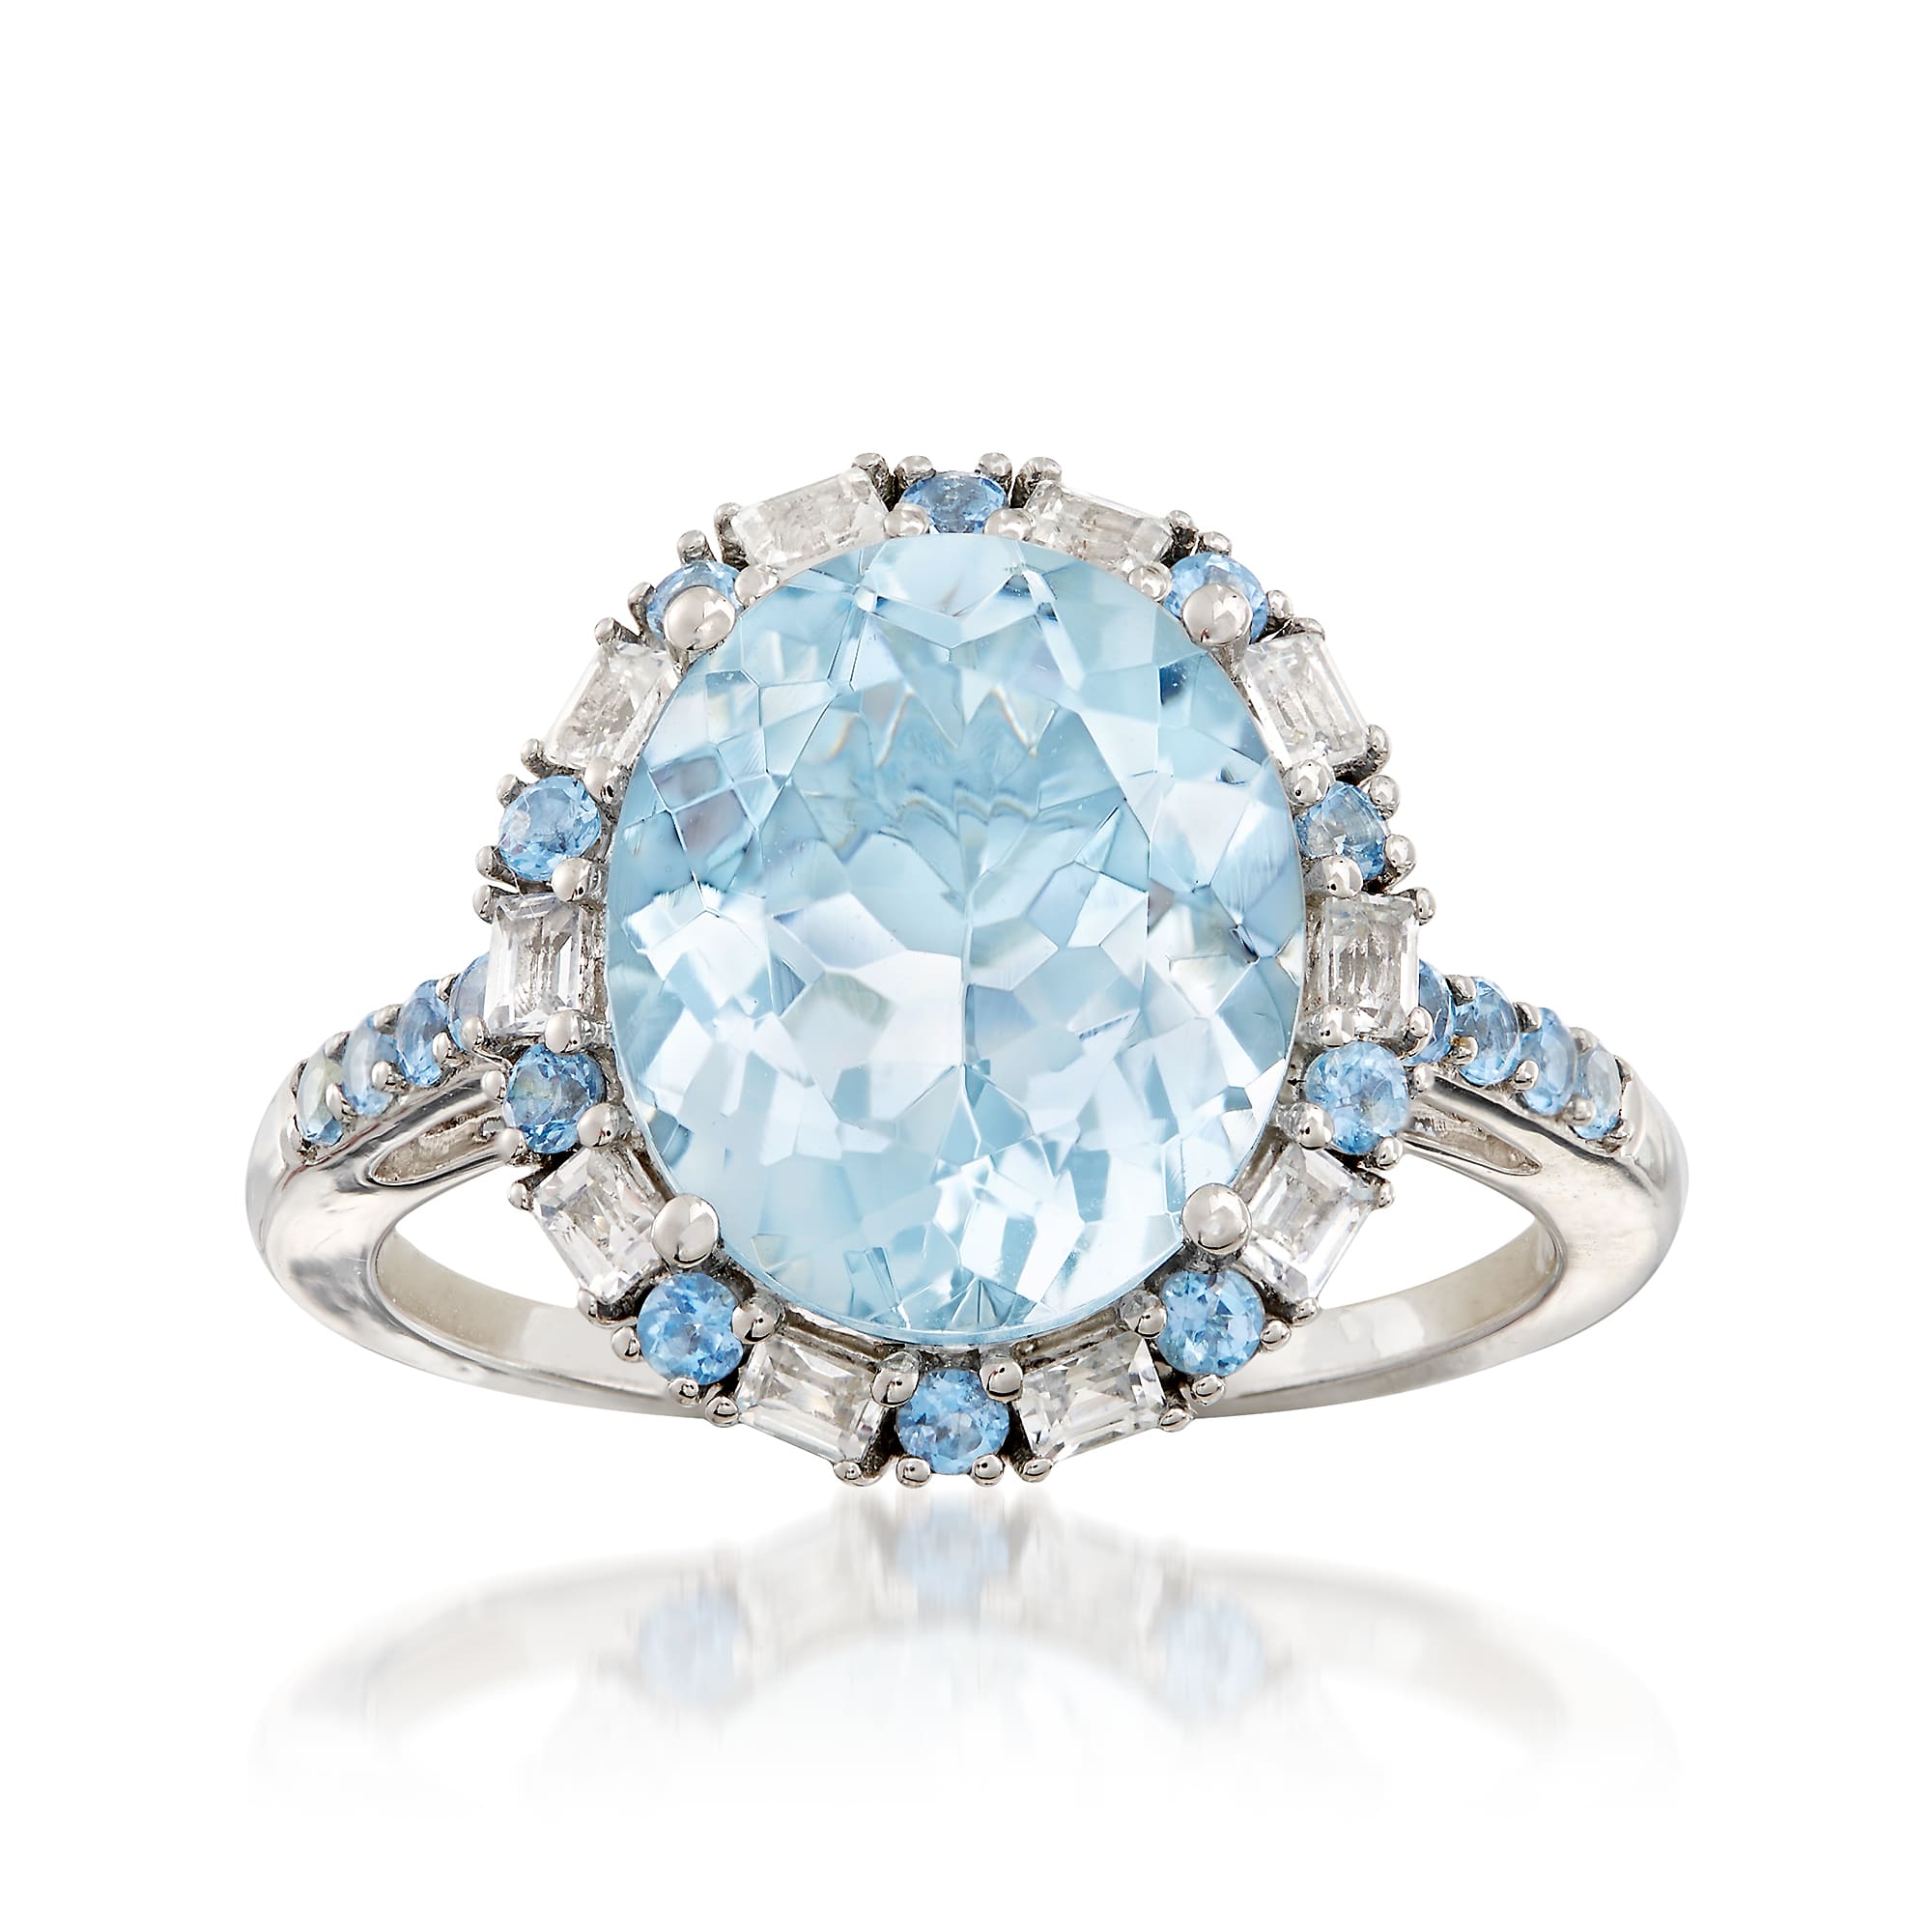 4.30 ct. t.w. Aquamarine and .40 ct. t.w. White Sapphire Ring in 14kt ...